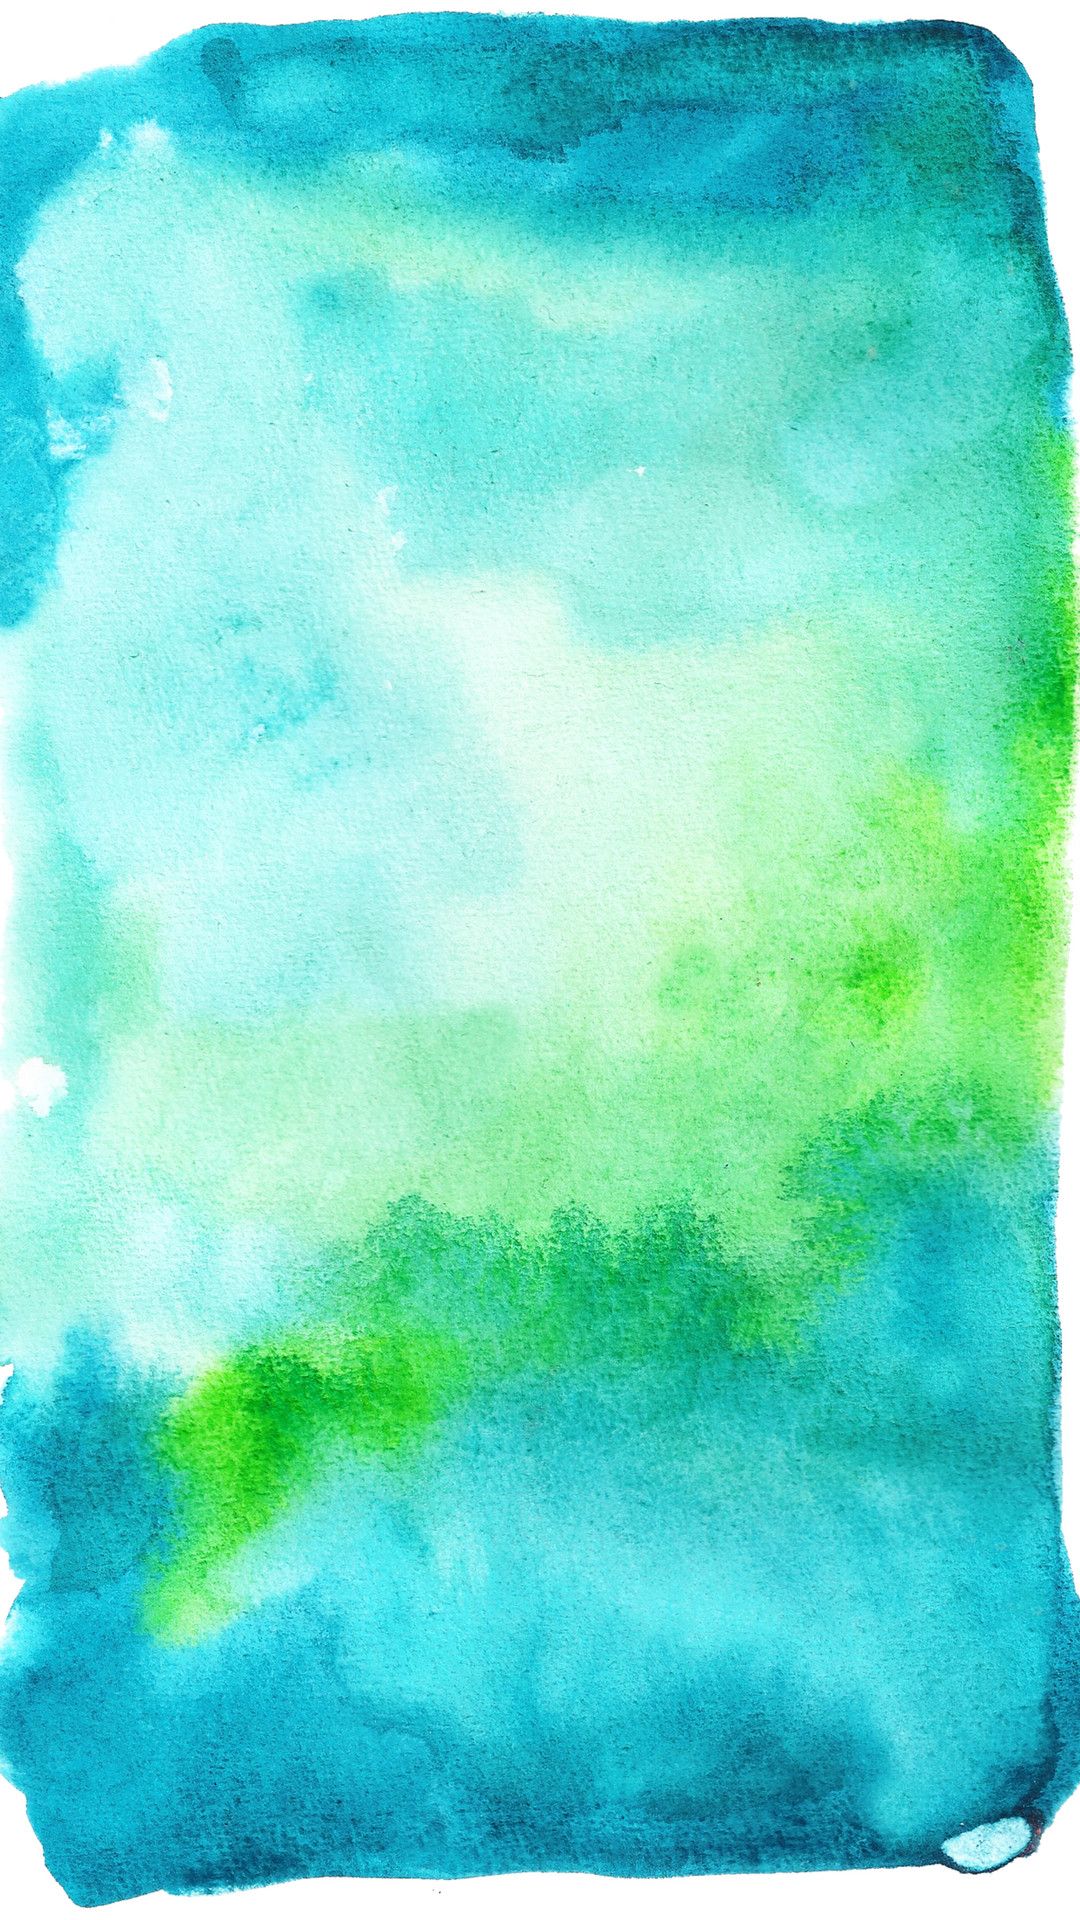 Teal Blue Green Watercolor Background